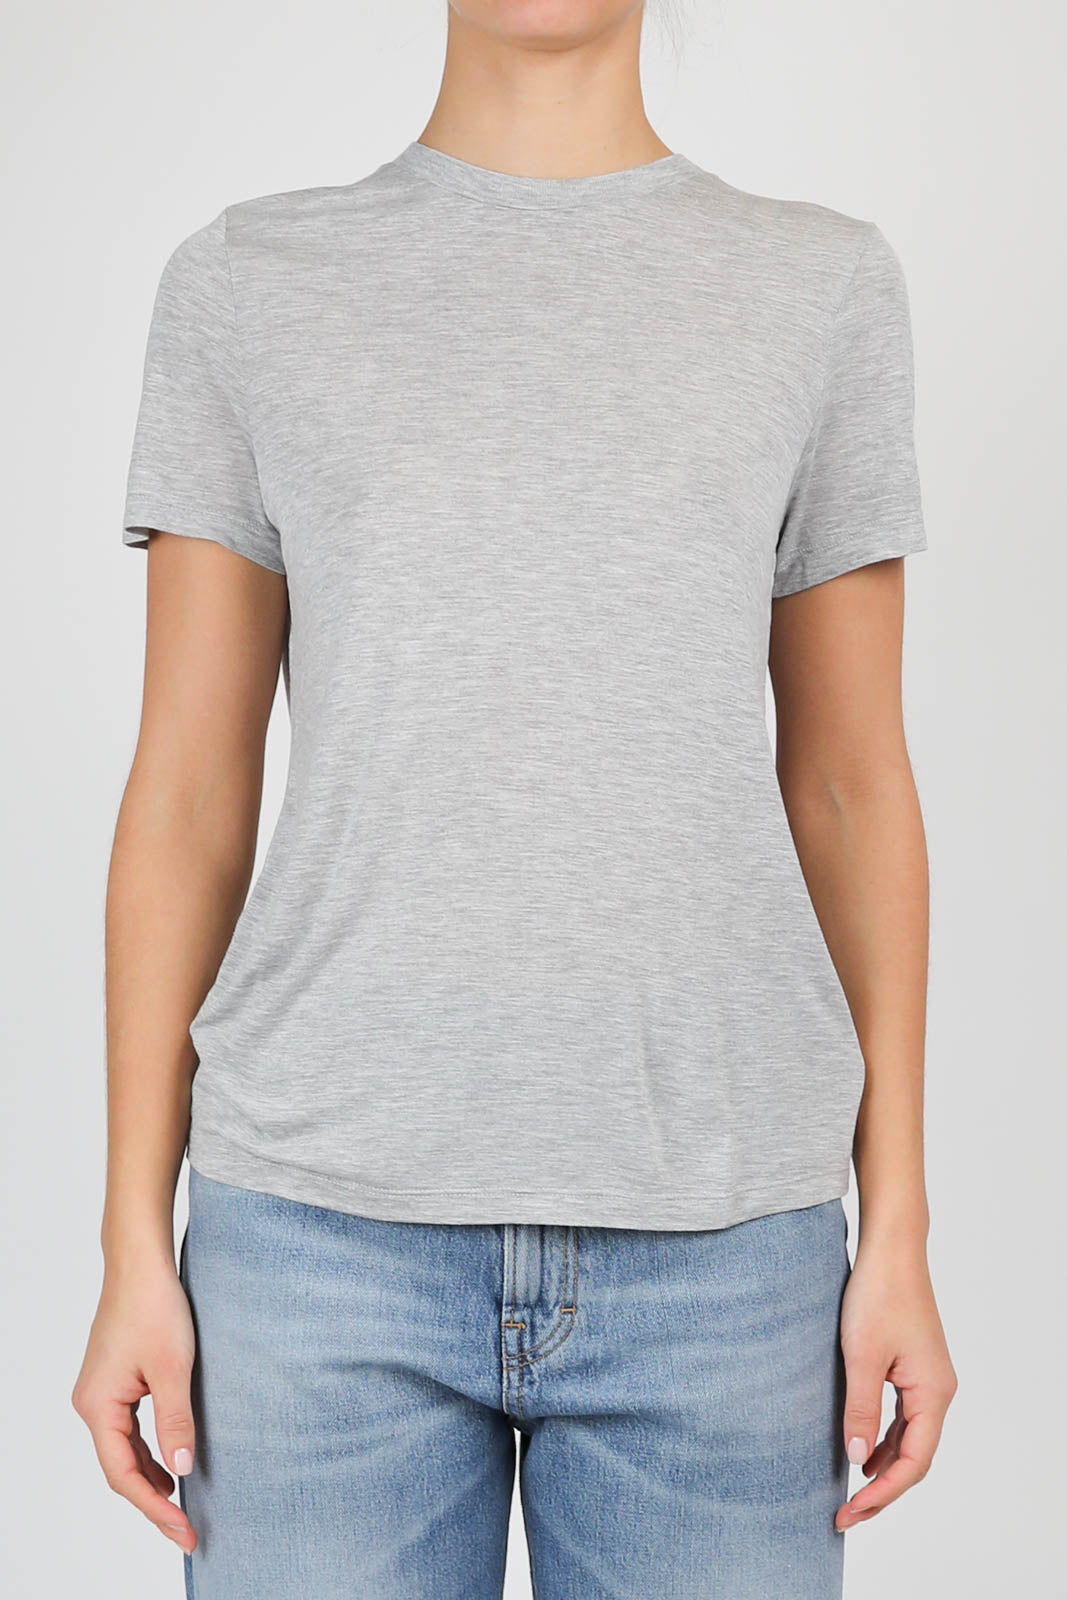 T-Shirt Annise in Heather Grey